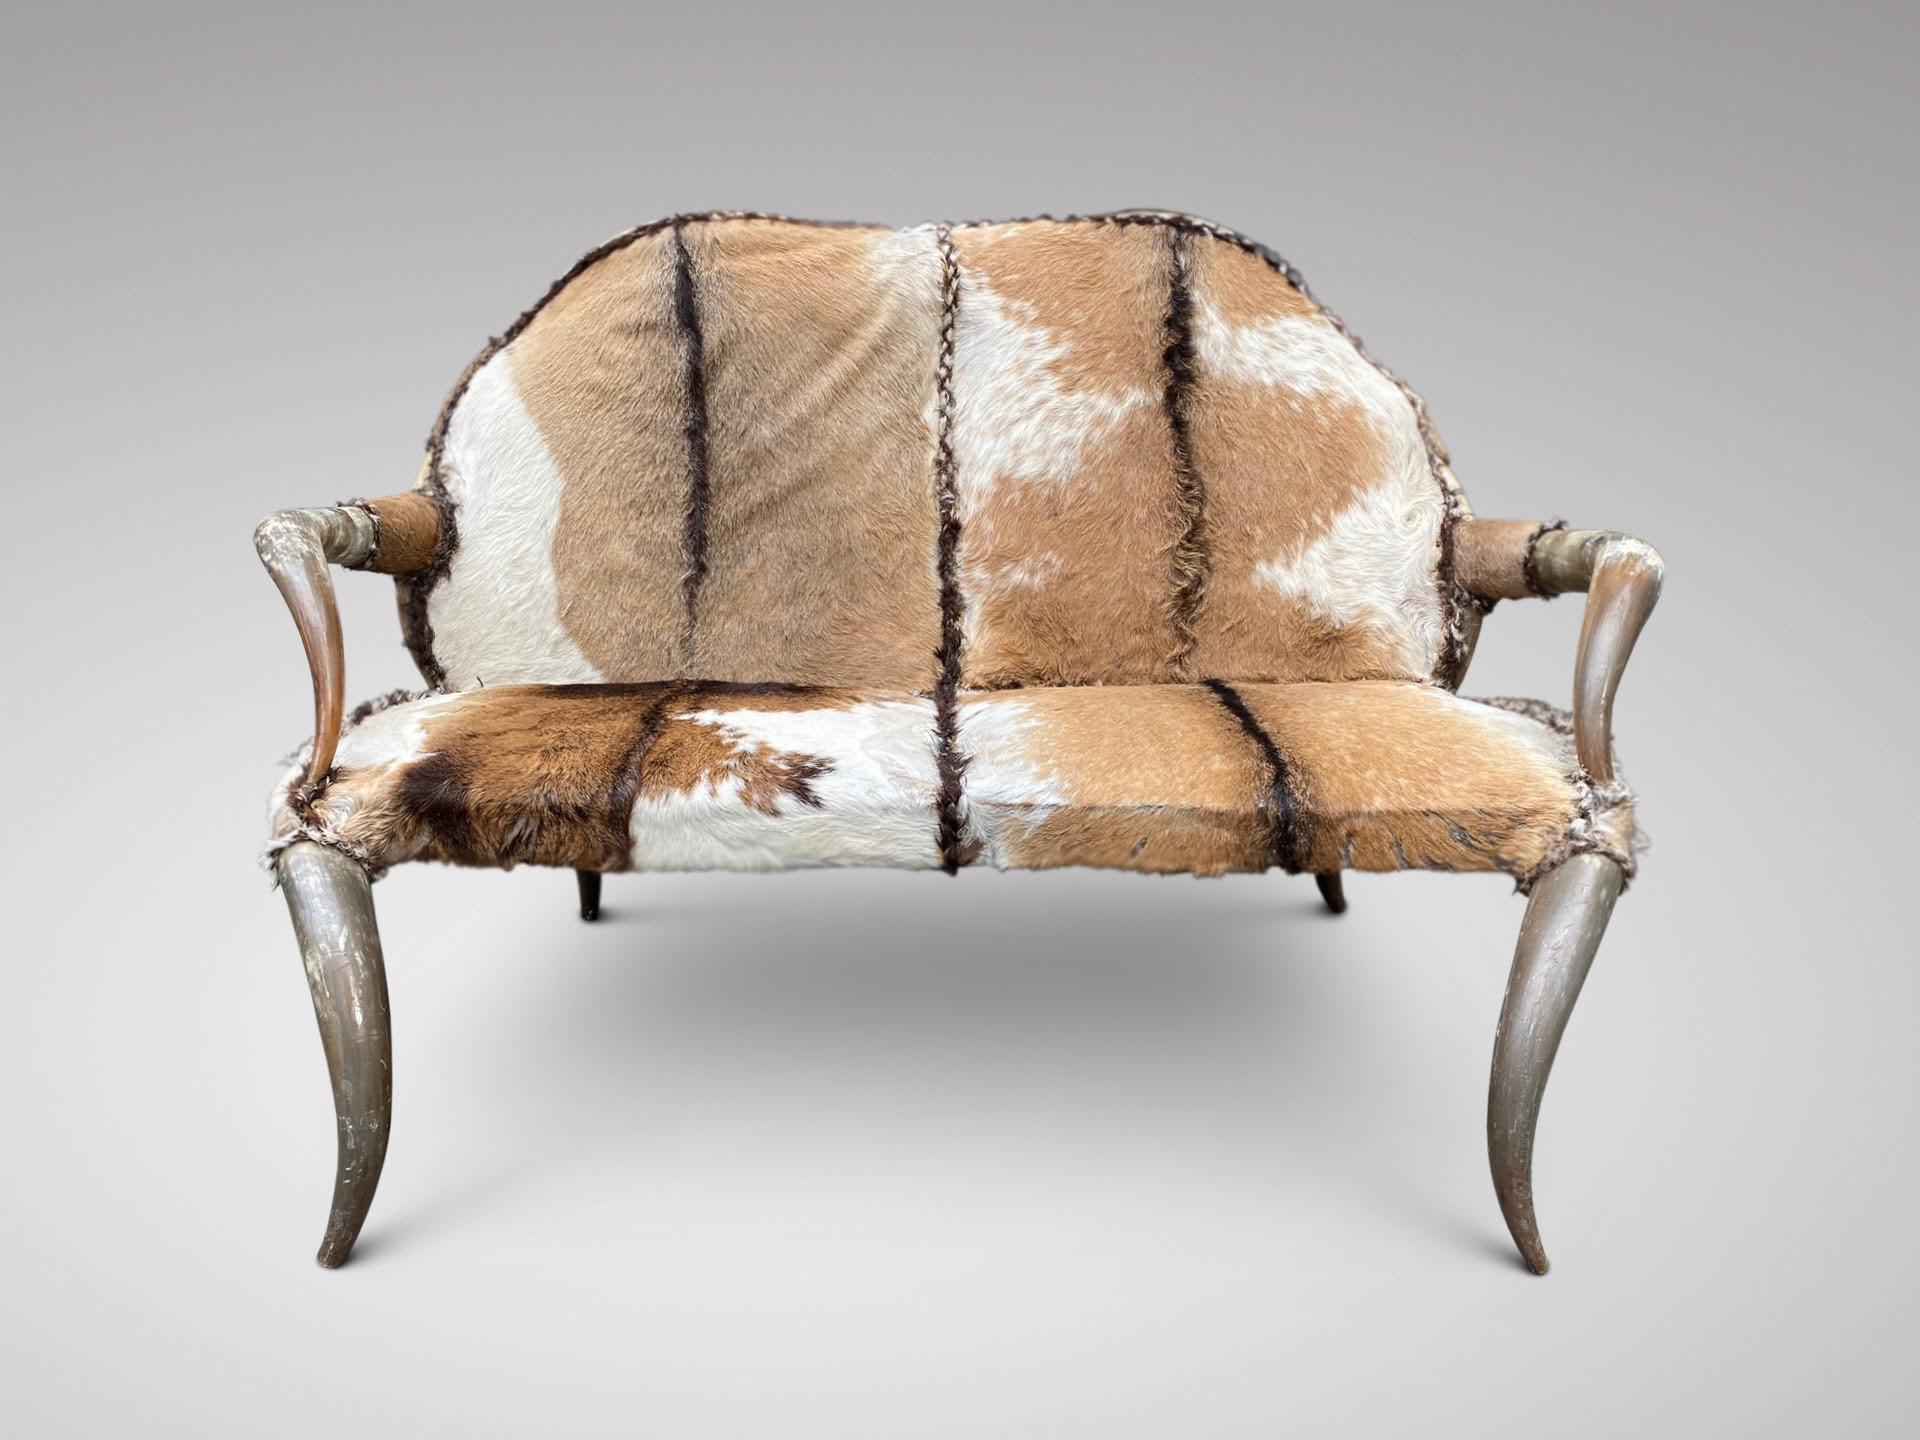 A very decorative and in good condition late 19th century 8 horn 2 seater sofa with original upholstery. The back and arms fashioned with horns as well as the feet. The seat is covered in the original hide. Toward the end of the 19th century, there